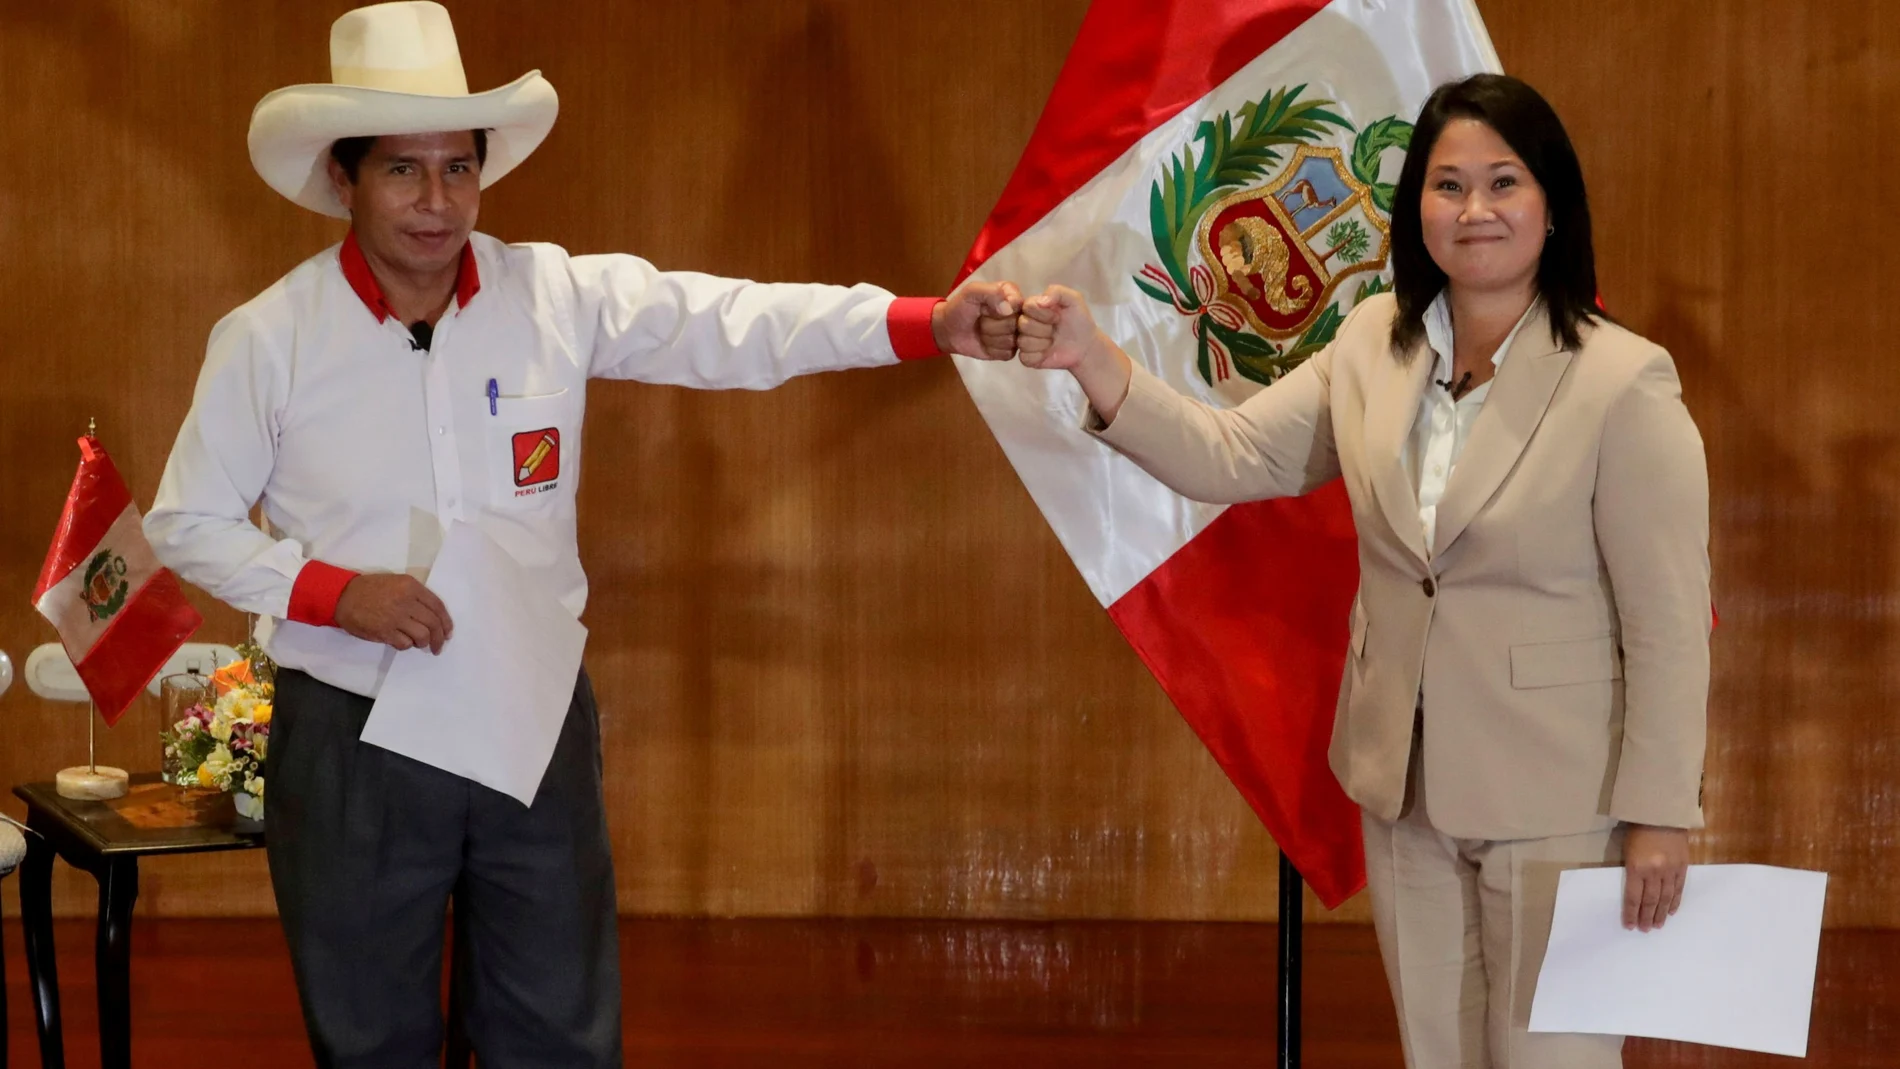 FILE PHOTO: Peruvian presidential candidates Pedro Castillo and Keiko Fujimori, who will face each other in a run-off vote on June 6, gesture after signing a "Pact for Democracy," in Lima, Peru May 17, 2021. REUTERS/Sebastian Castaneda/File Photo